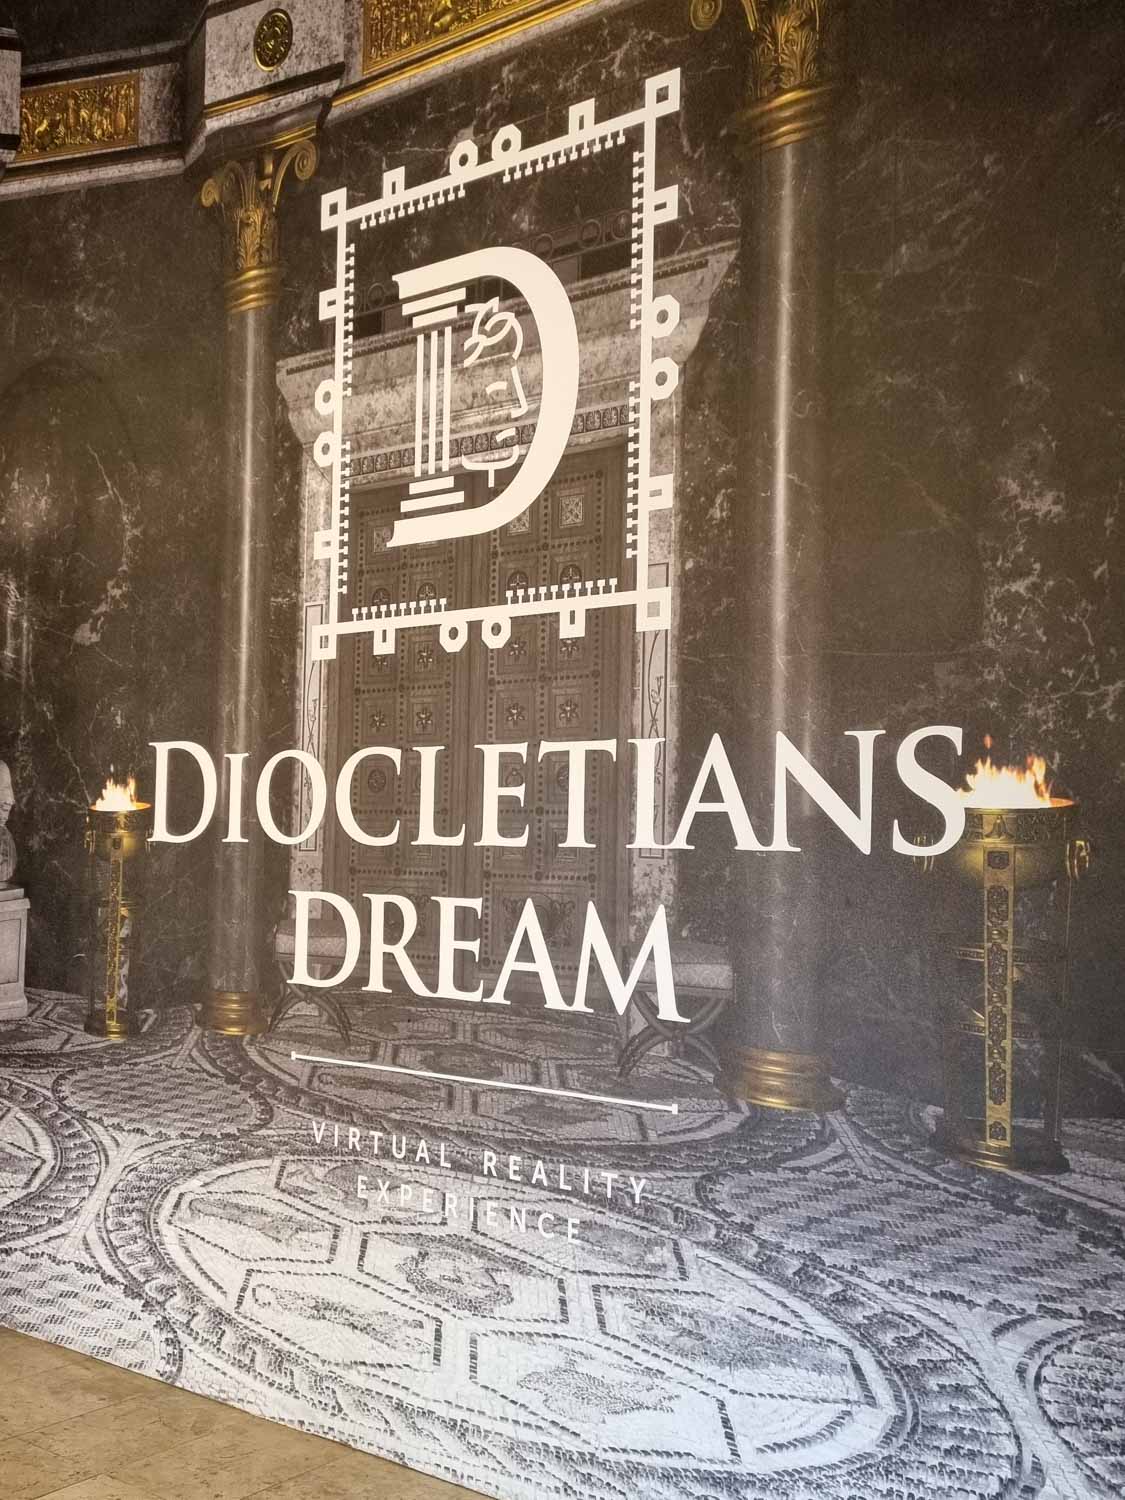 Sign at the entrance to Diocletians Dream Virtual Reality Experience - a great introduction to the city's history if you're visiting Split with kids